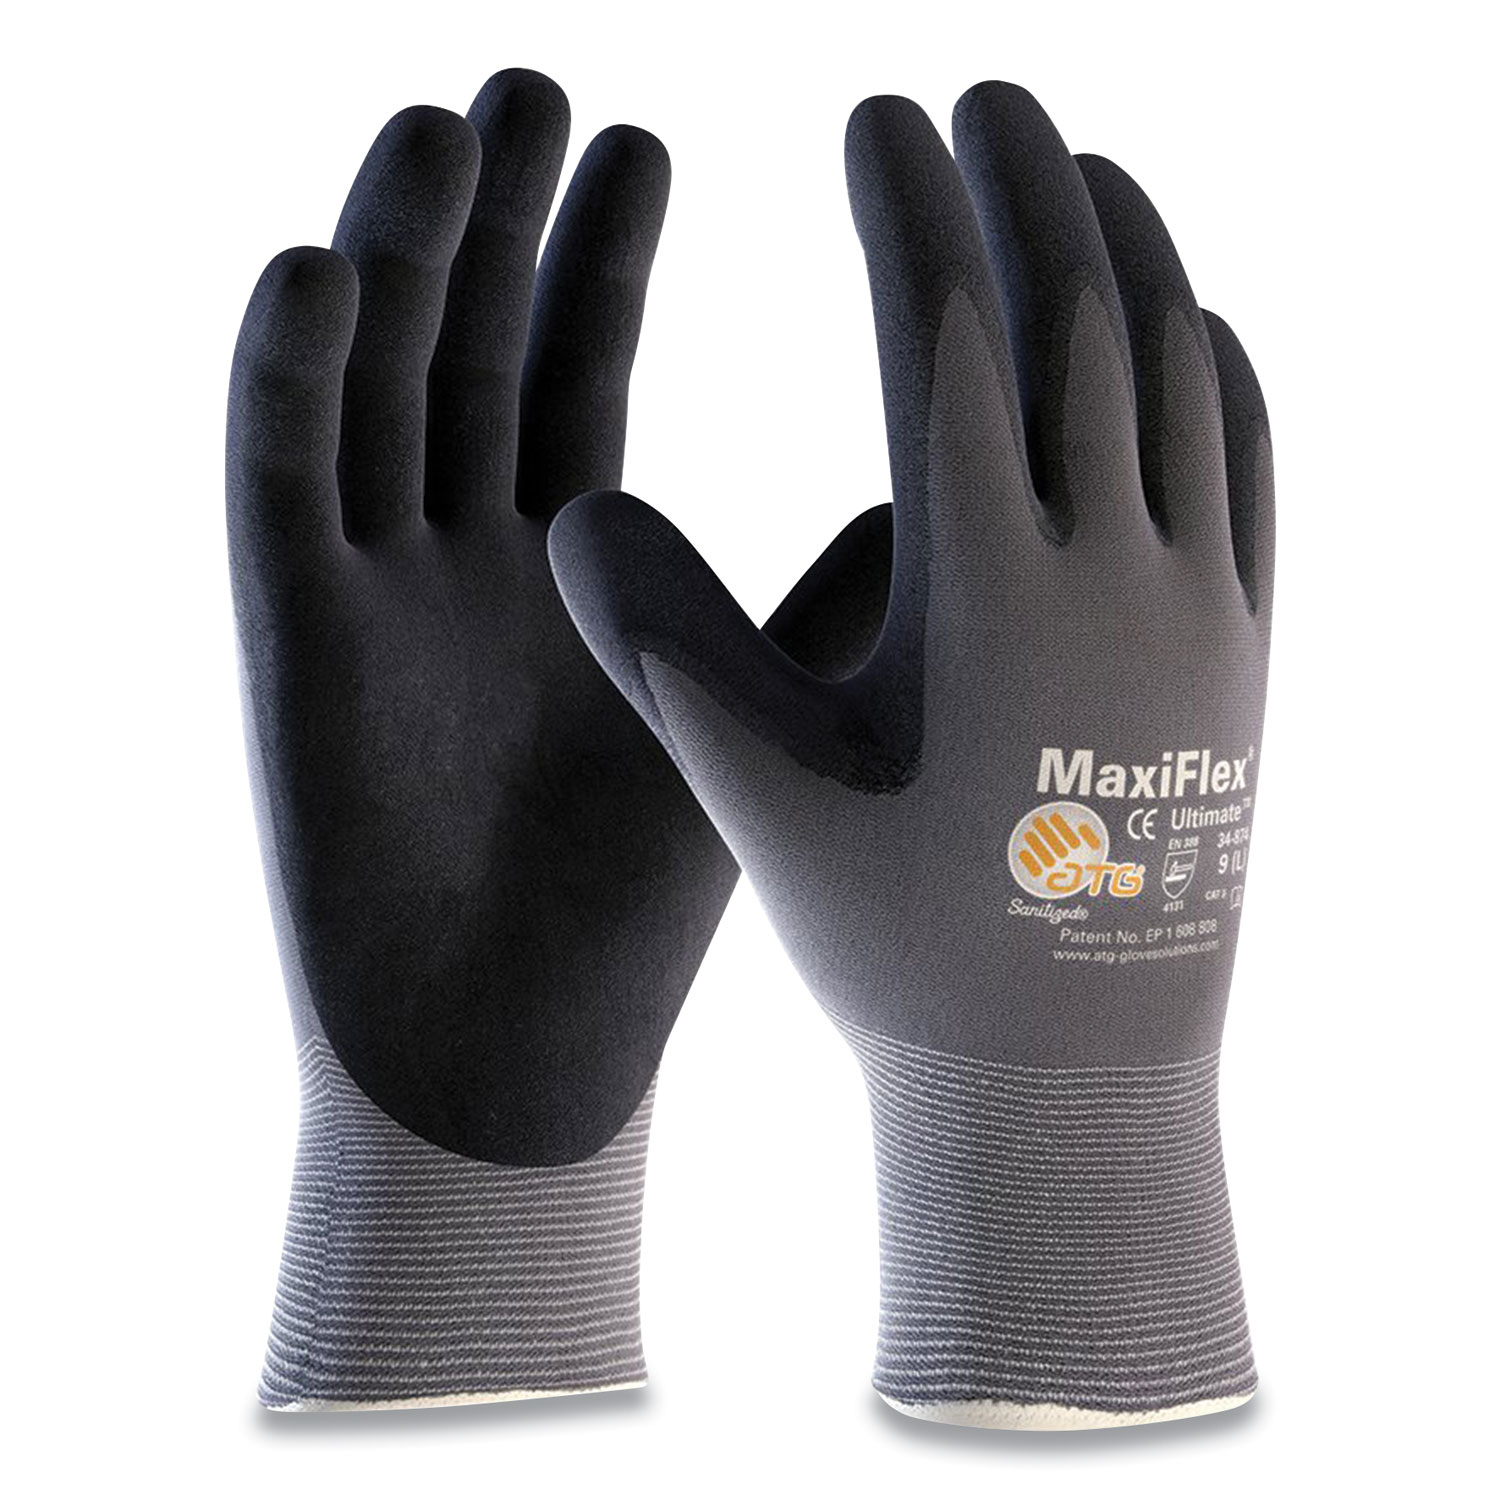 MaxiFlex® Ultimate Seamless Knit Nylon Gloves, Nitrile Coated MicroFoam Grip on Palm, Fingers and Knuckles, X-Large, Gray, 12 Pairs